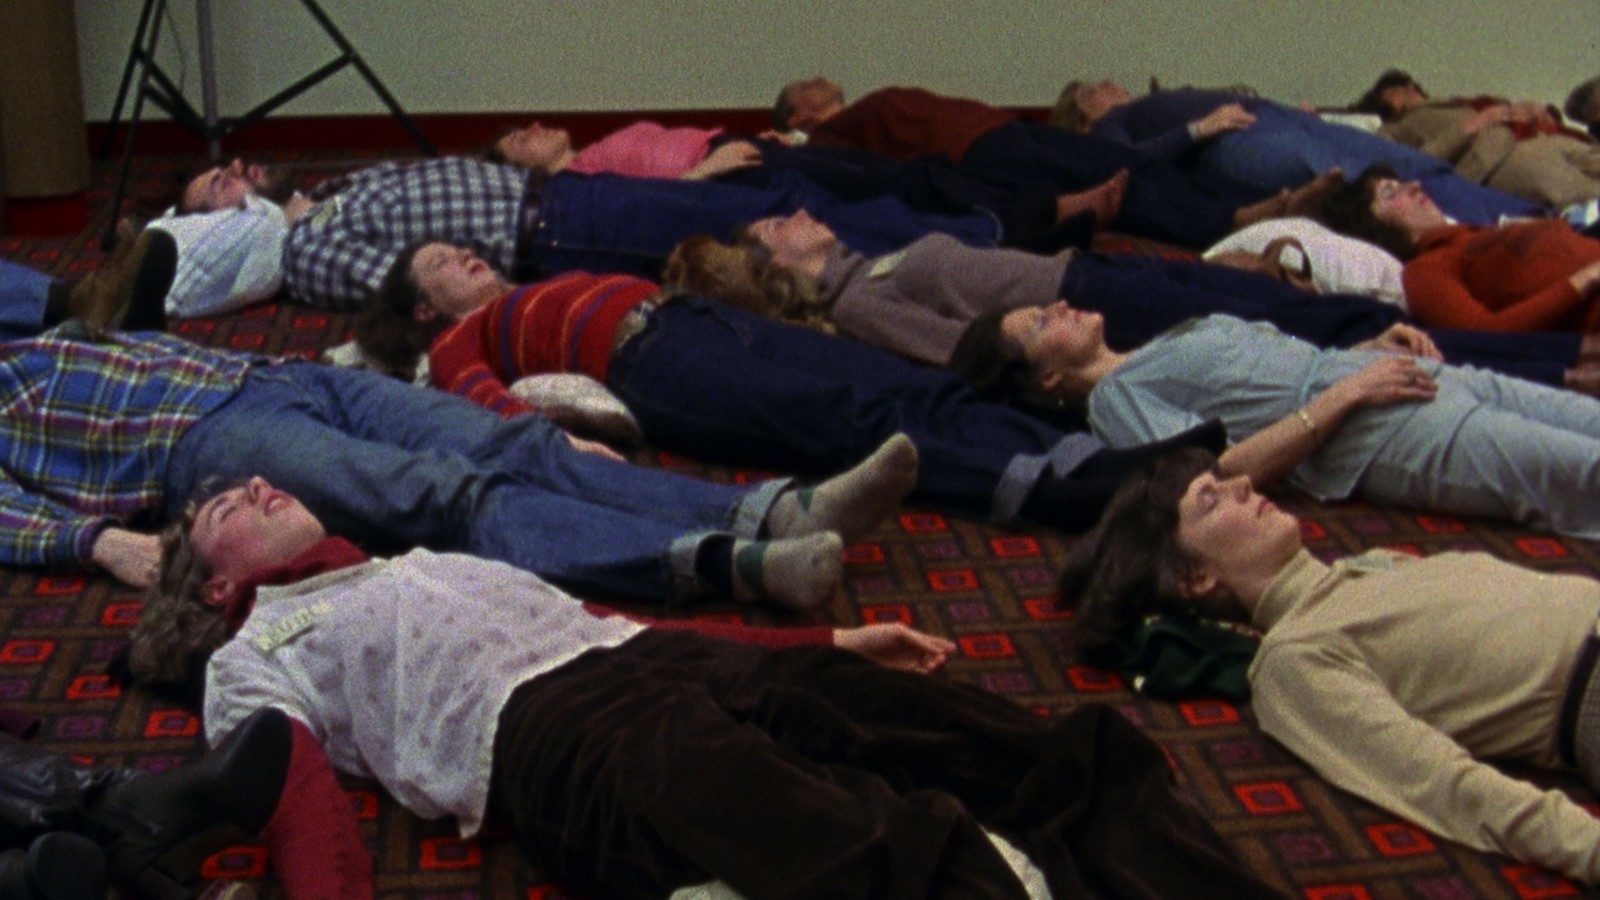 A group of people lying on a floor, with their eyes closed